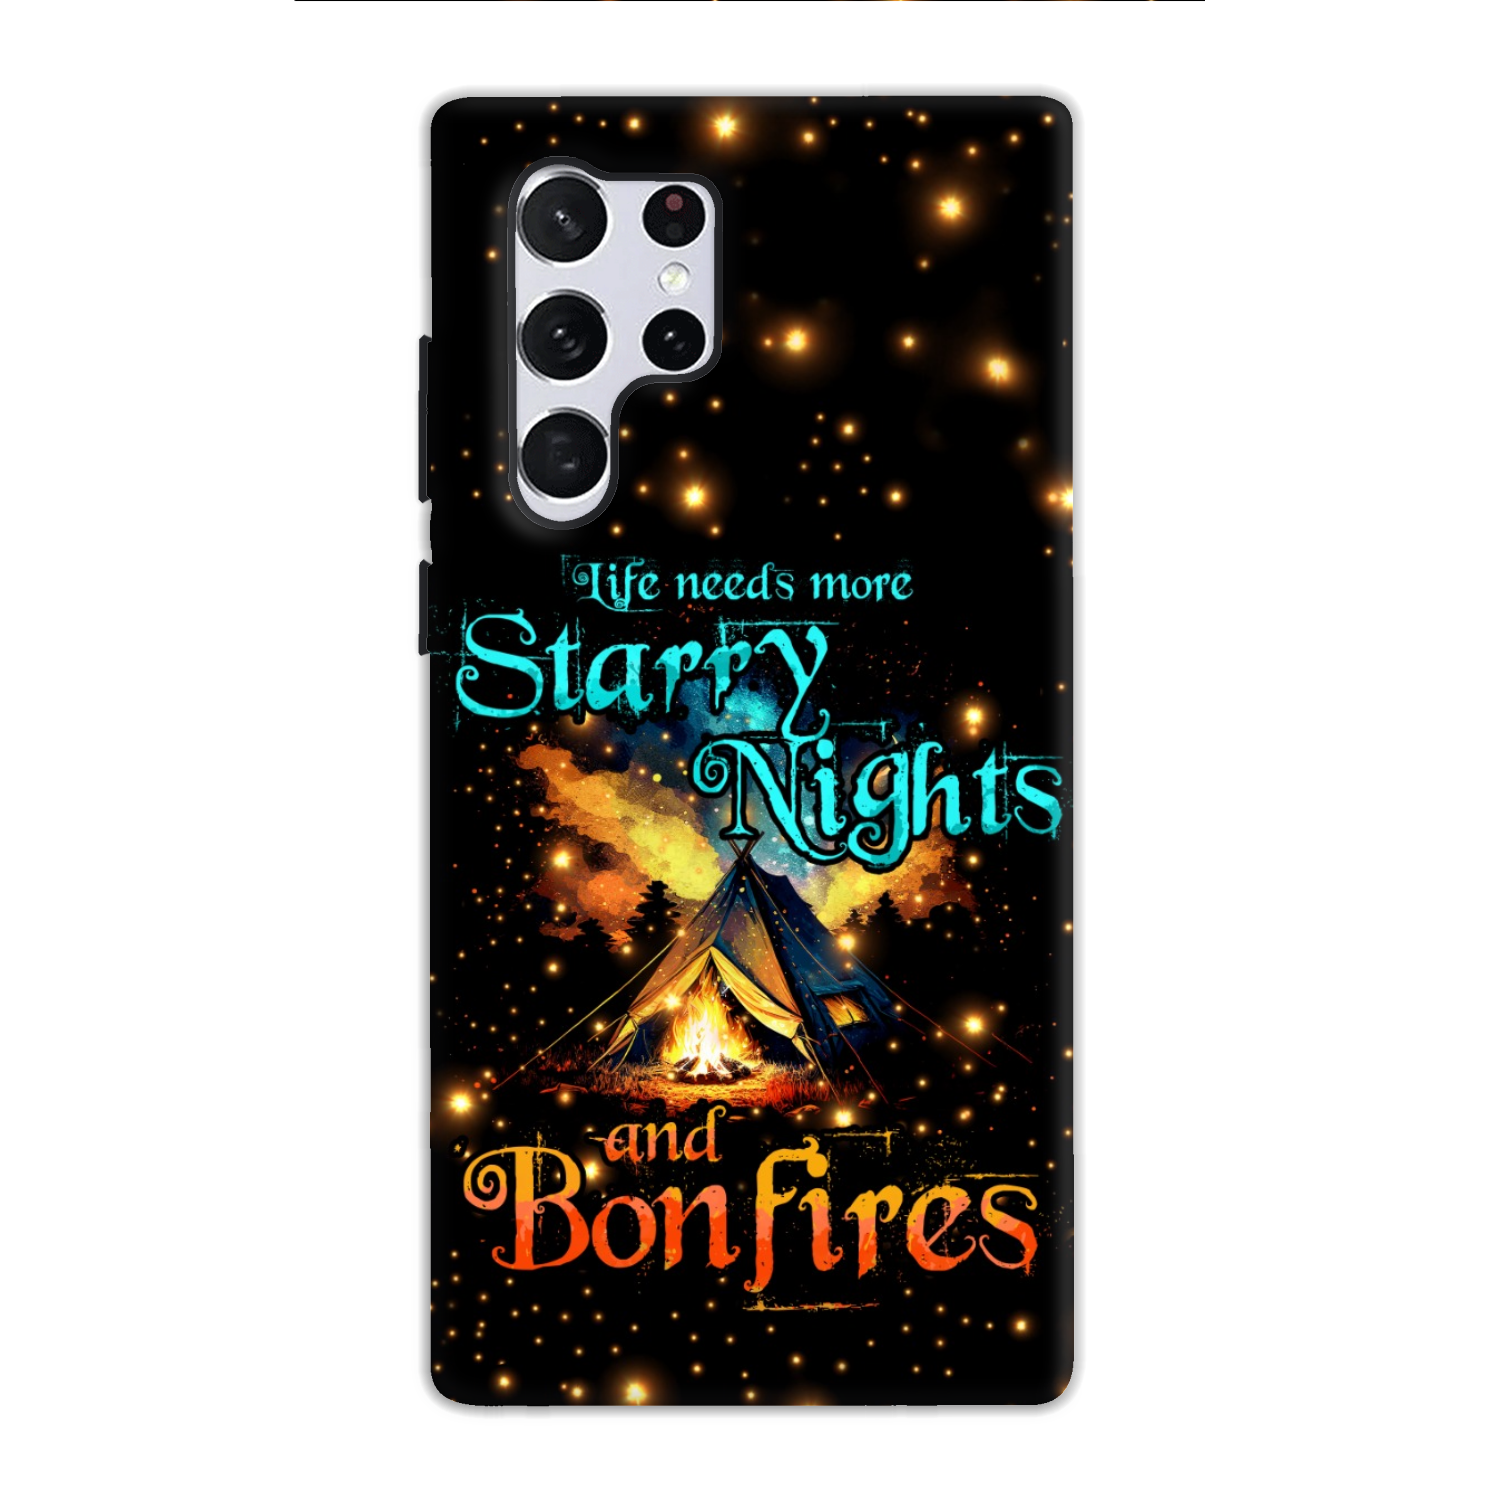 LIFE NEEDS MORE STARRY NIGHTS AND BONFIRES PHONE CASE - TYTD2804232